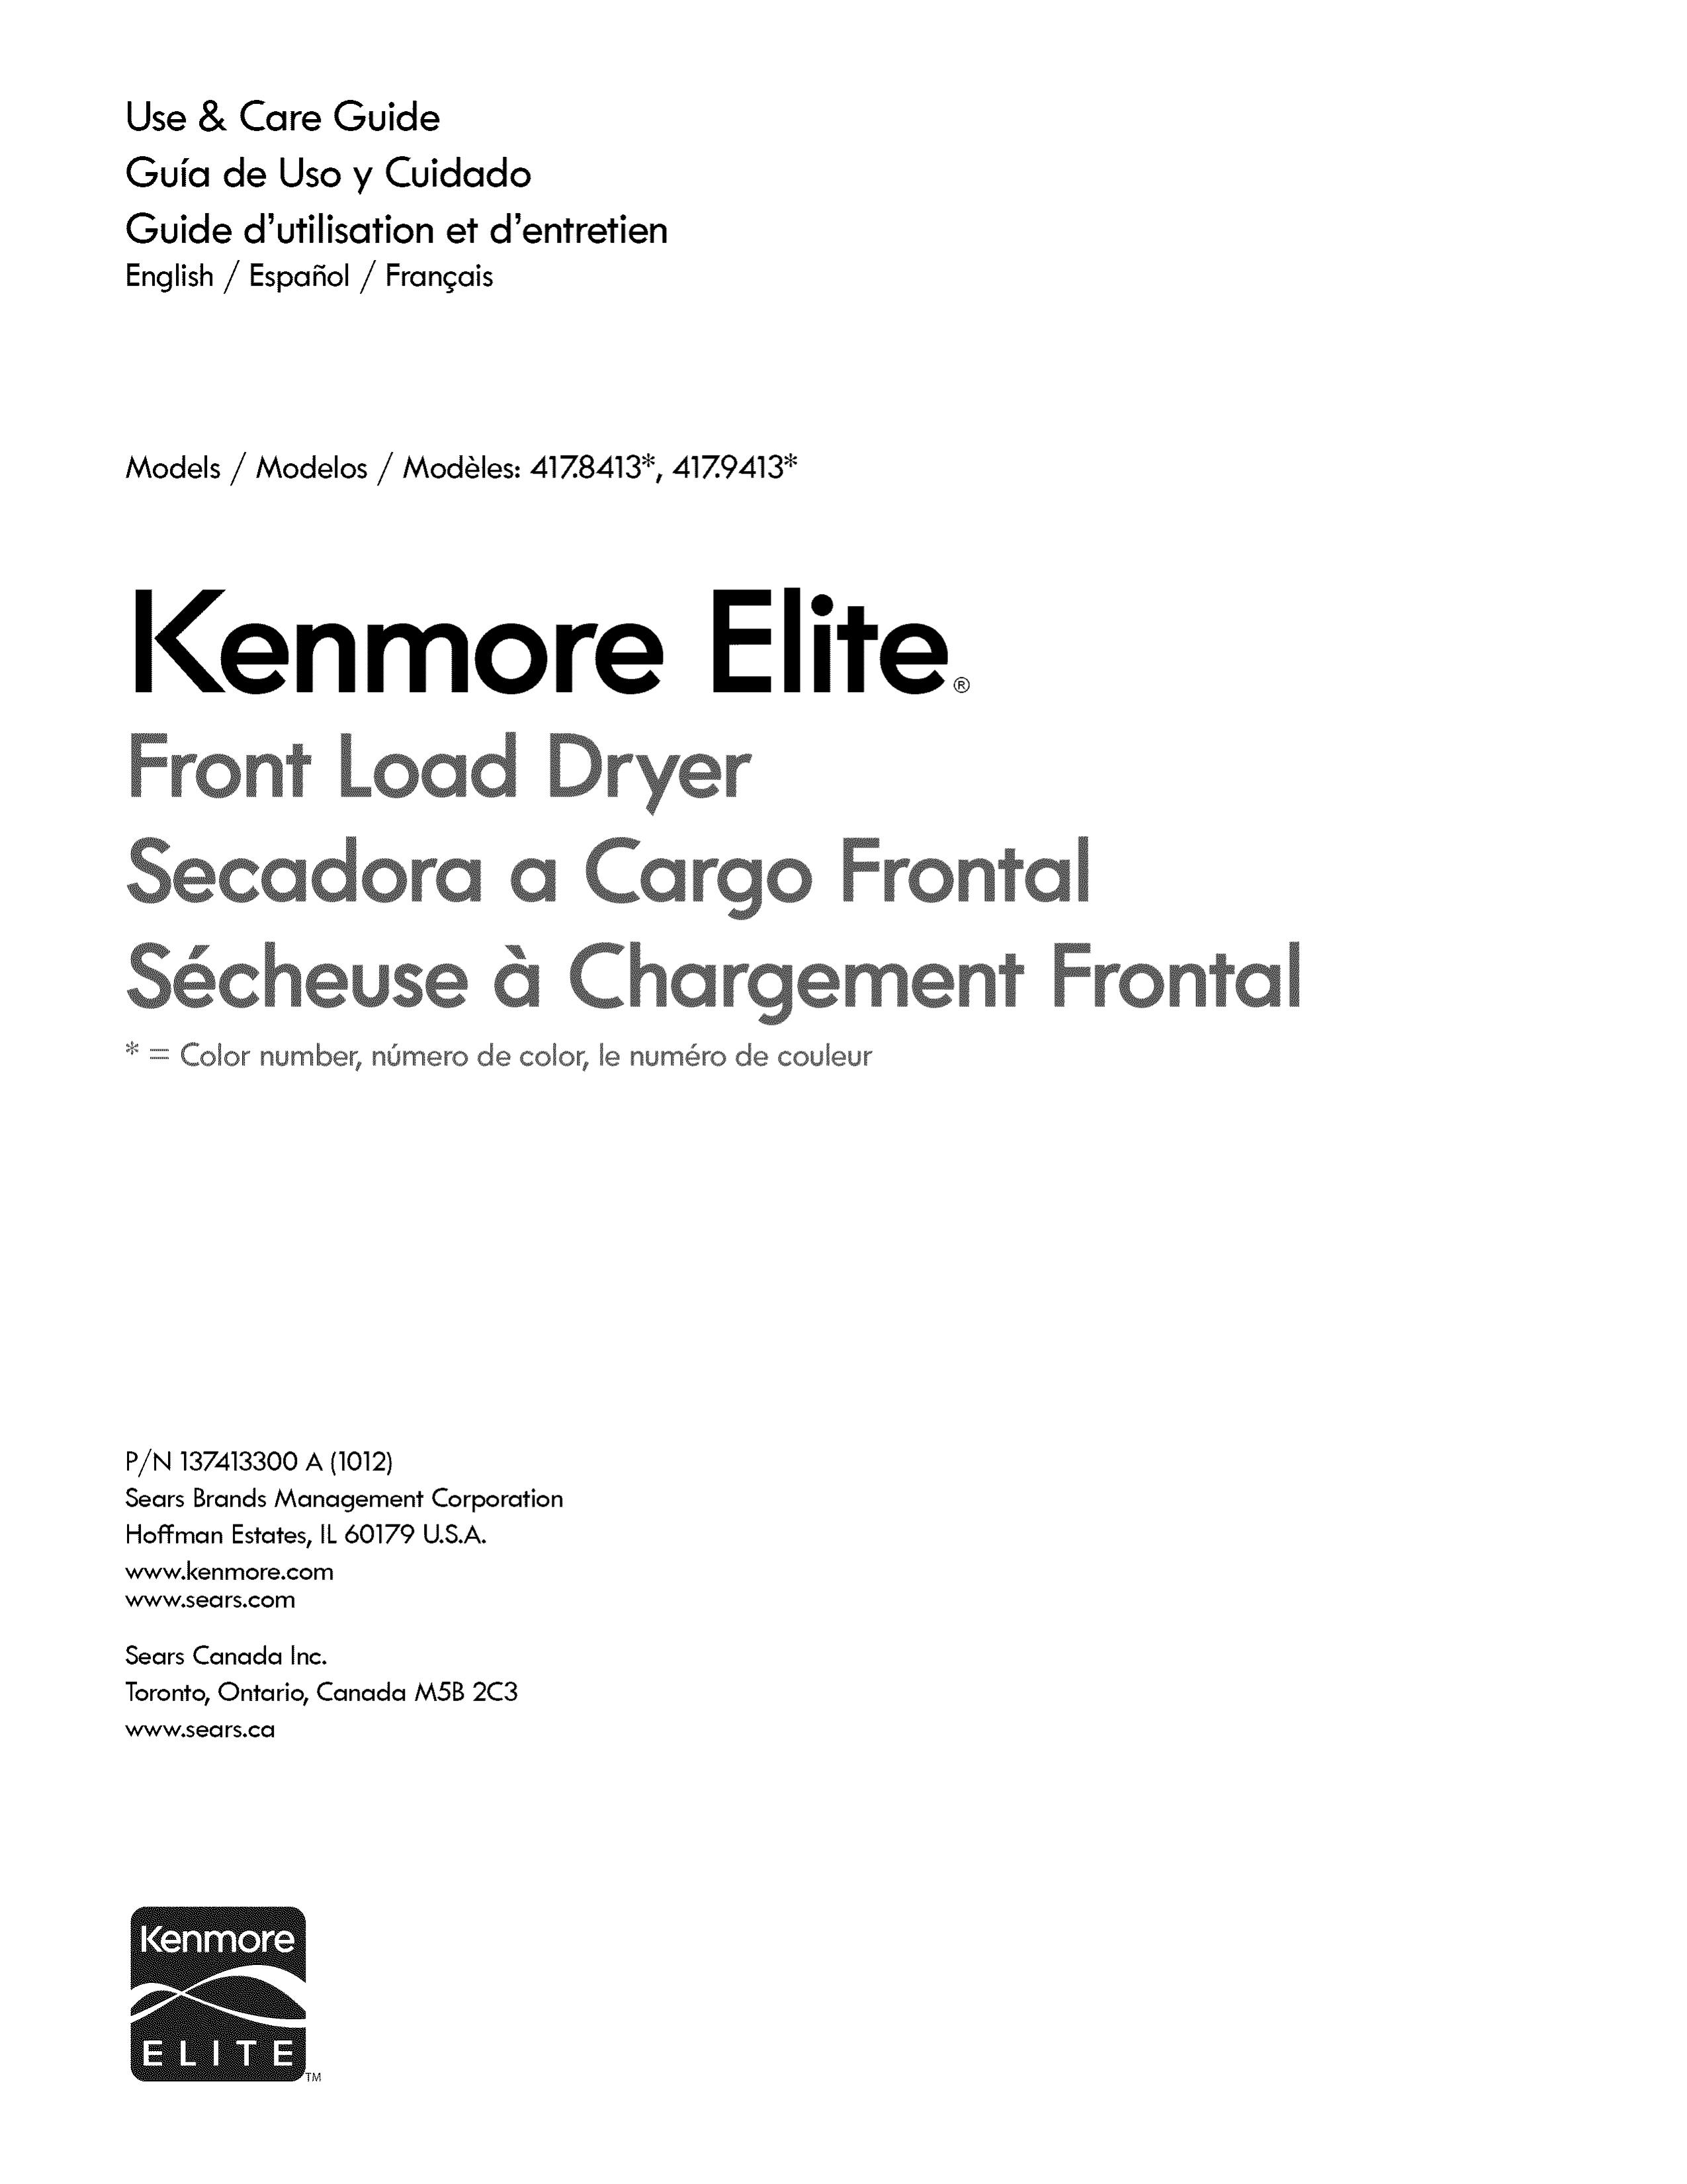 Kenmore 417.9413 Clothes Dryer User Manual